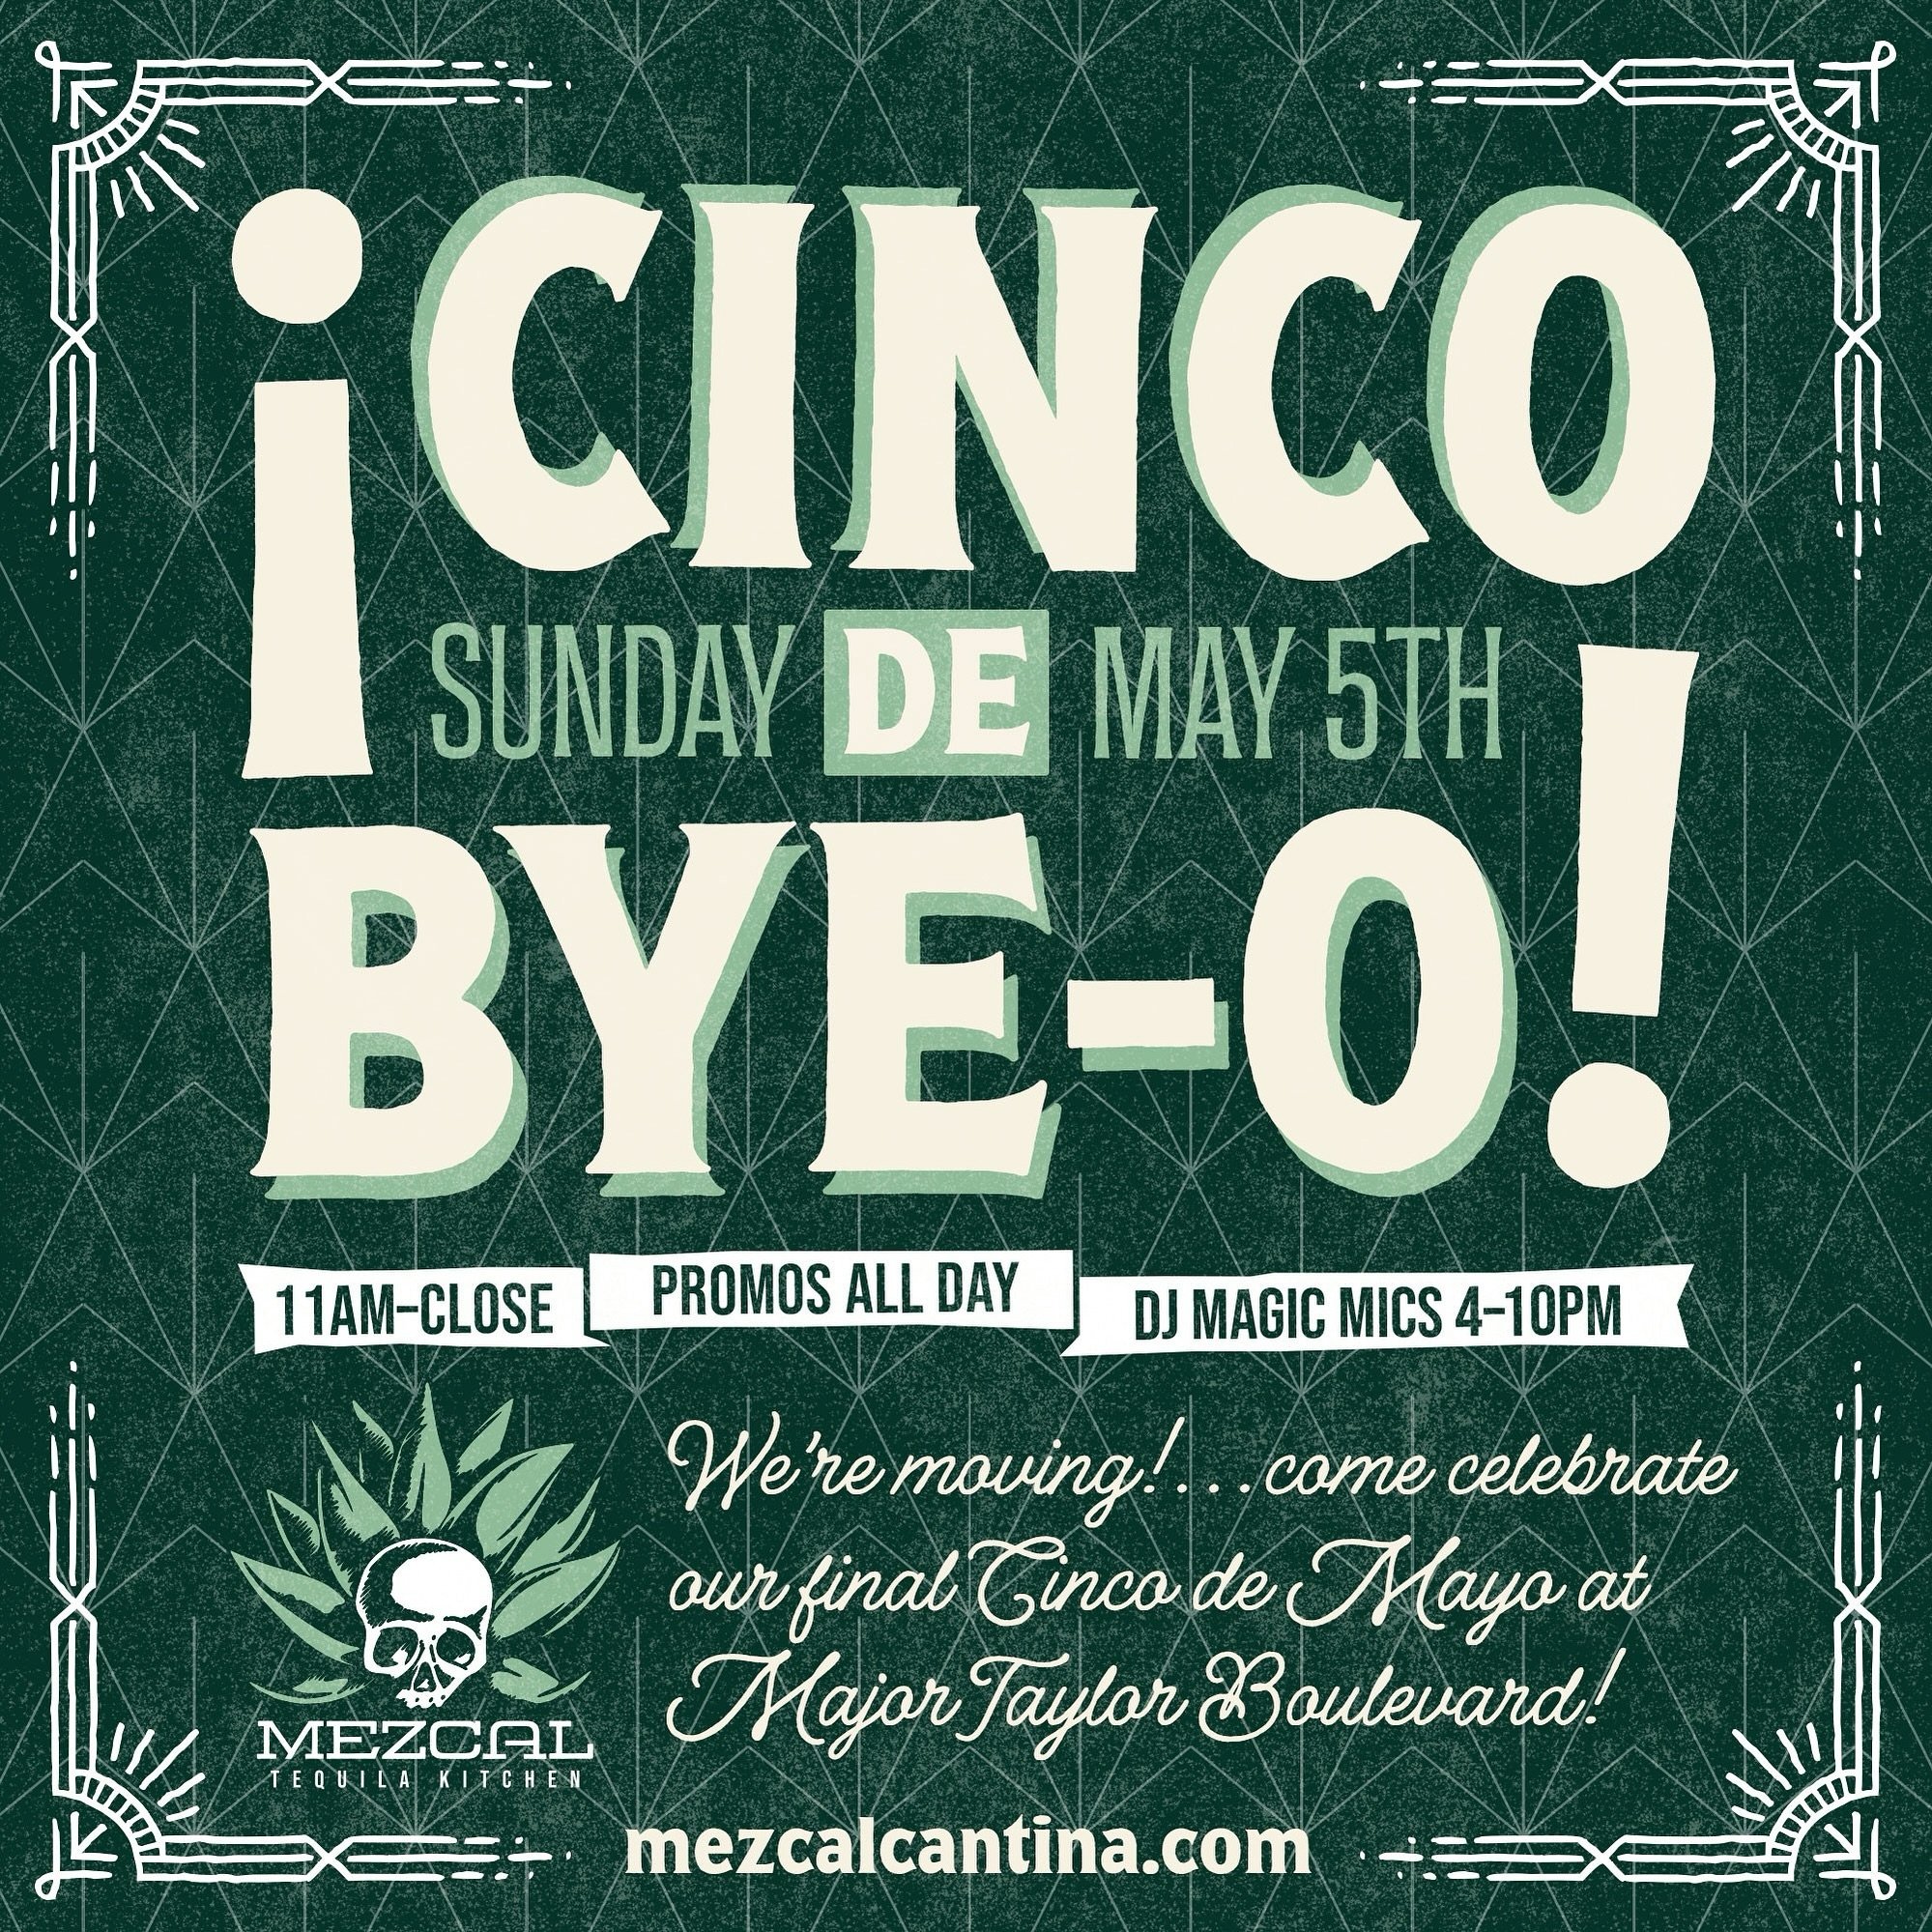 We&rsquo;re moving...come celebrate our final Cinco De Mayo on Major Taylor Boulevard tomorrow starting at 11am! Enter to win a FREE tequila and taco event for you and three friends at our new location ($400 value, no purchase necessary). Five winner